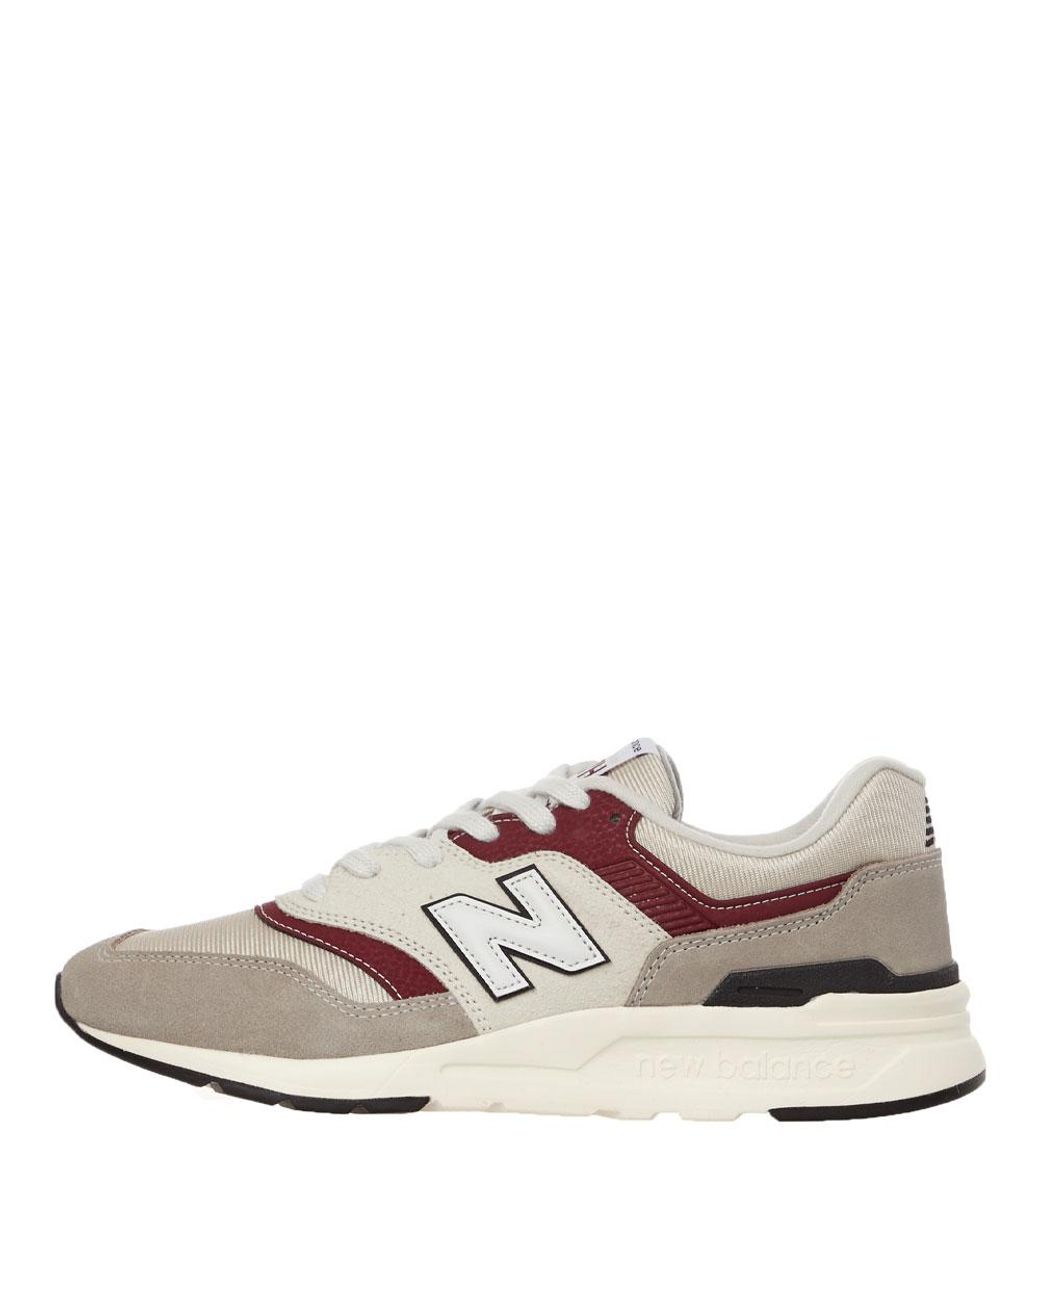 New Balance 997h Trainers – Moonbeam / Burgundy in Gray for Men | Lyst